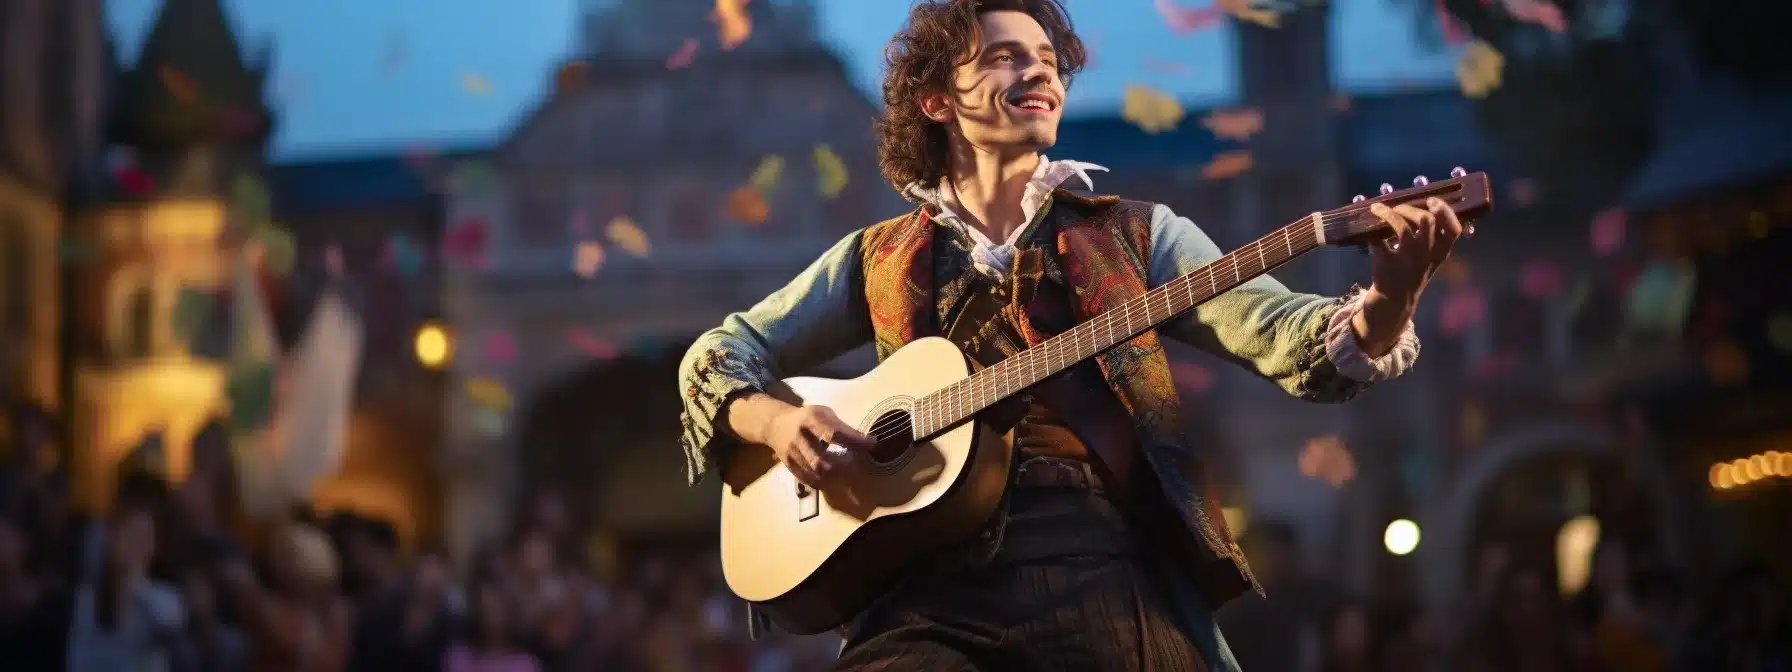 A Person Dressed As A Bard Performing In A Town Square, Captivating The Audience With Their Brand Persona.